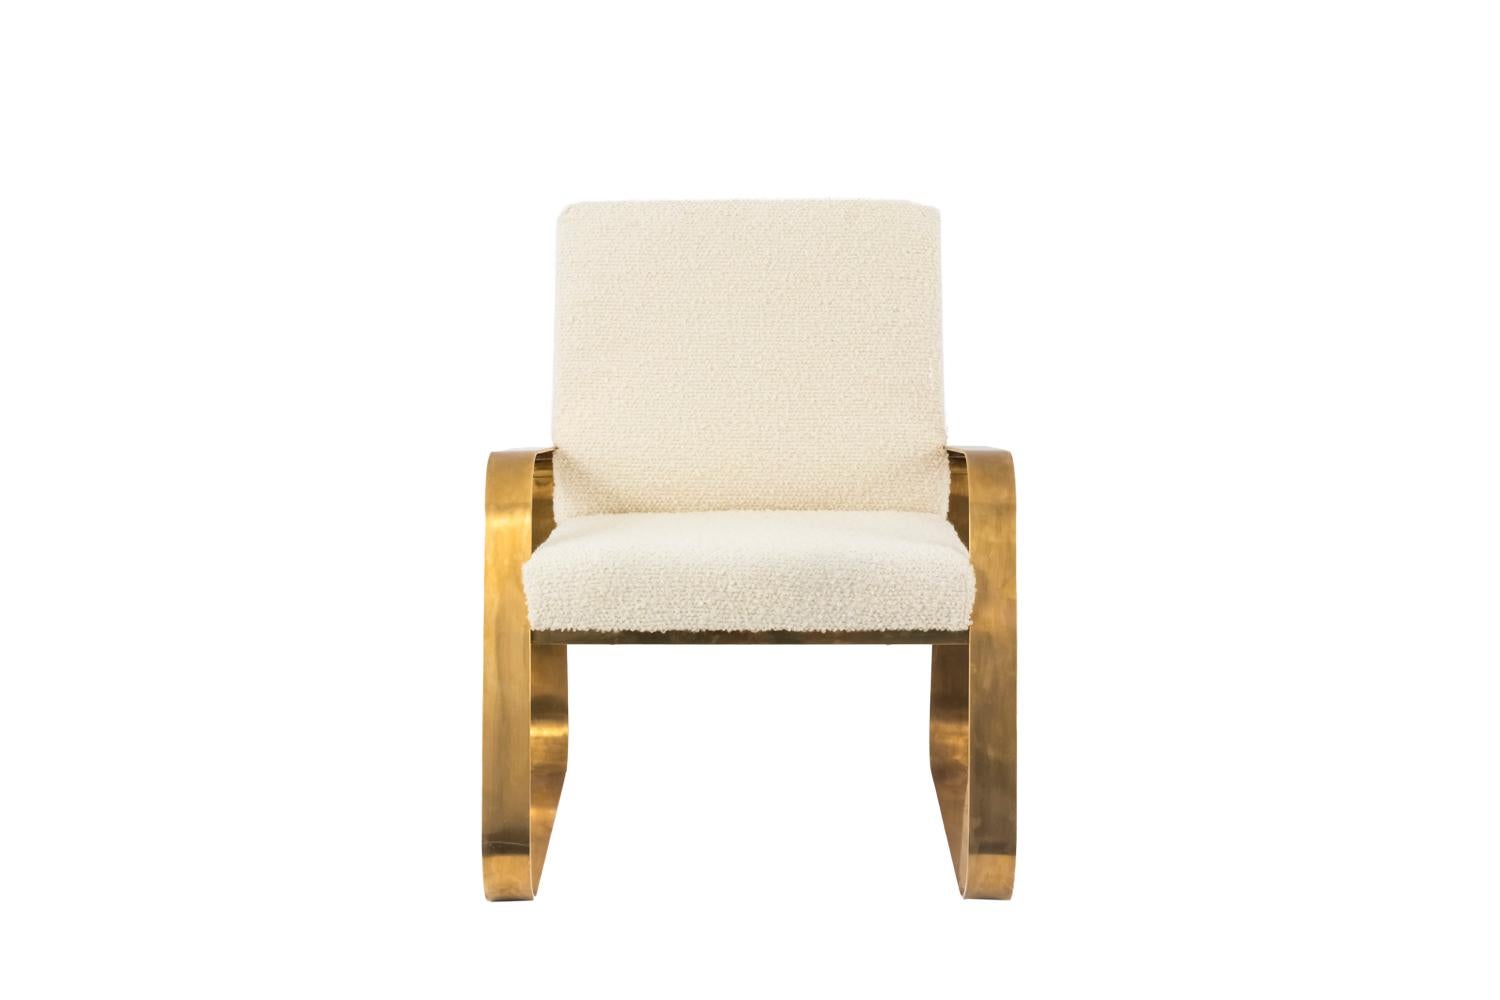 Product made on order

Pair of modern style easy chairs in gilt brushed brass standing on two legs in parallelepiped shape with curved angles forming arms.
Slightly inclined seat and back covered with a fabric with white curls.

Italian